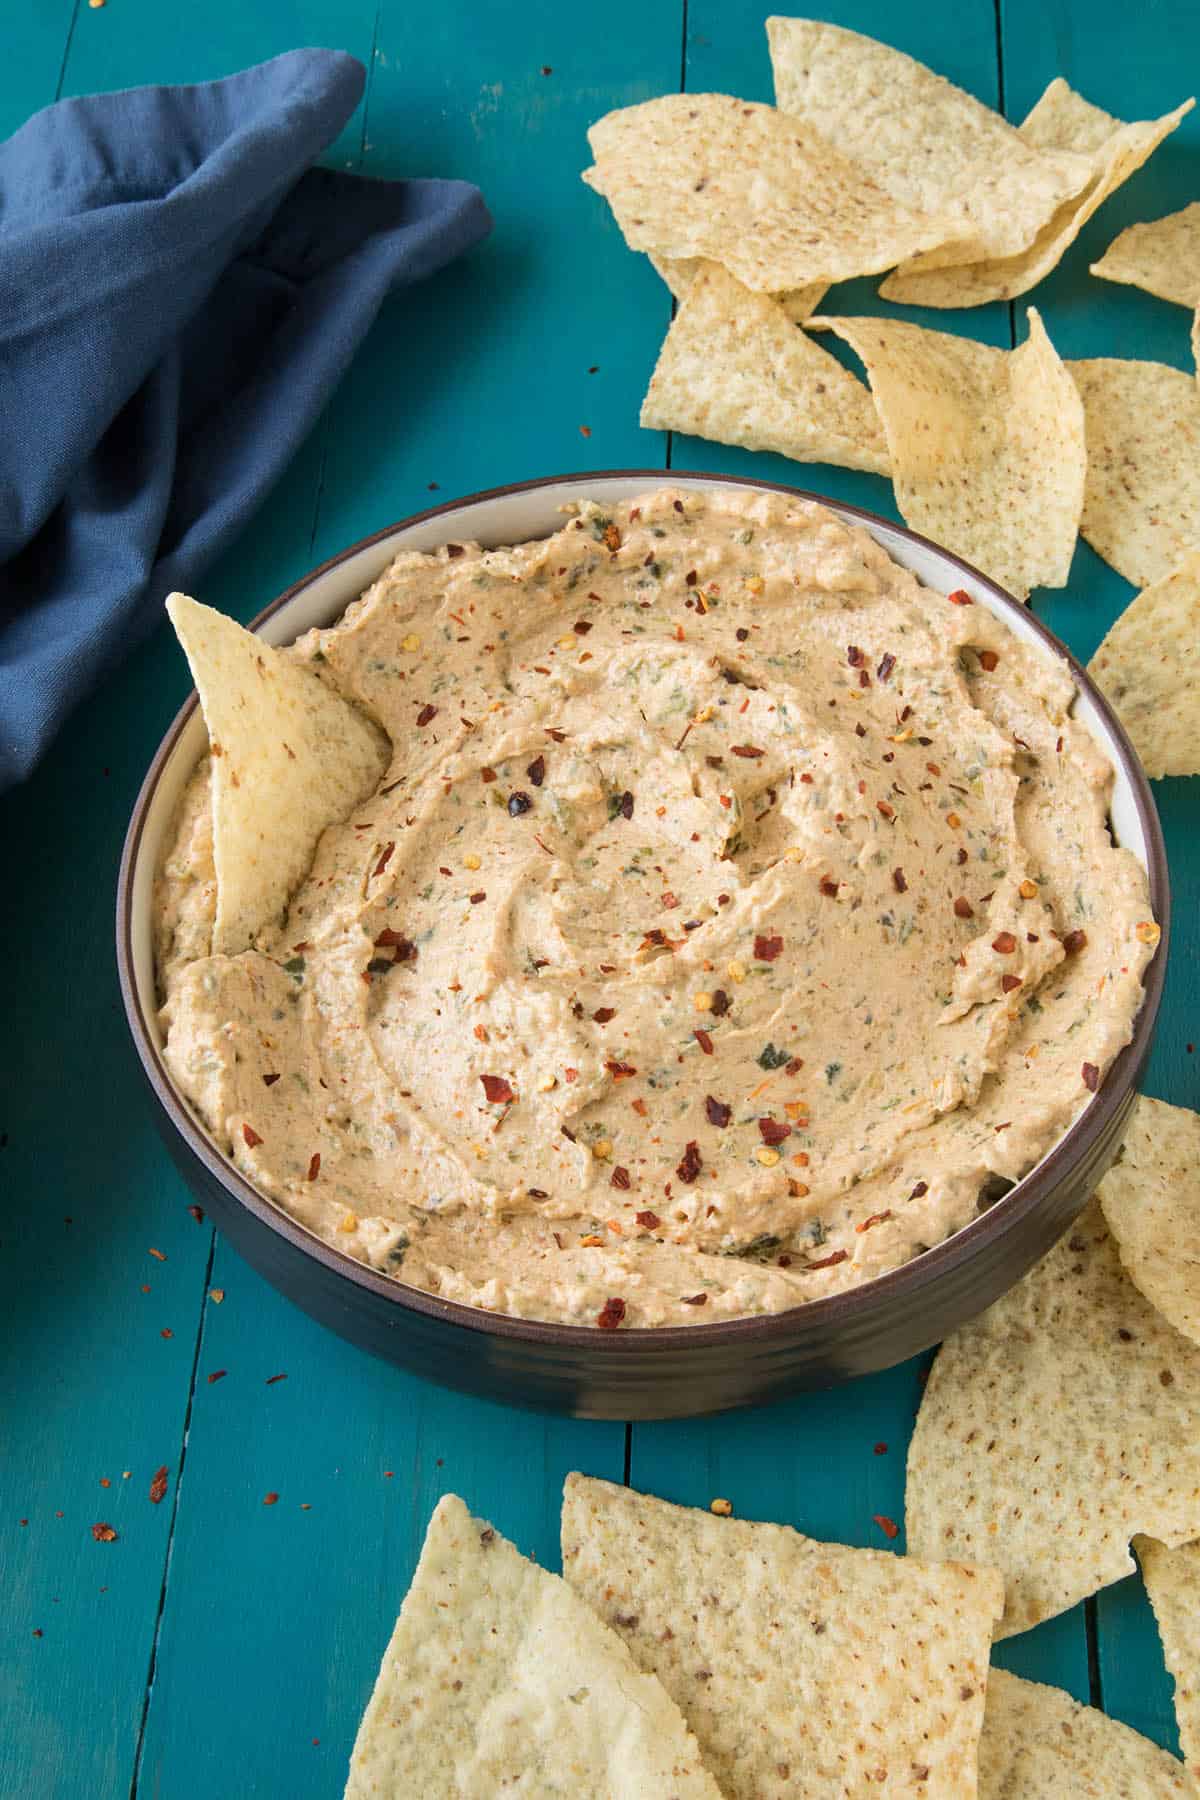 Jalapeno Cream Cheese Dip - Ready to Dig In